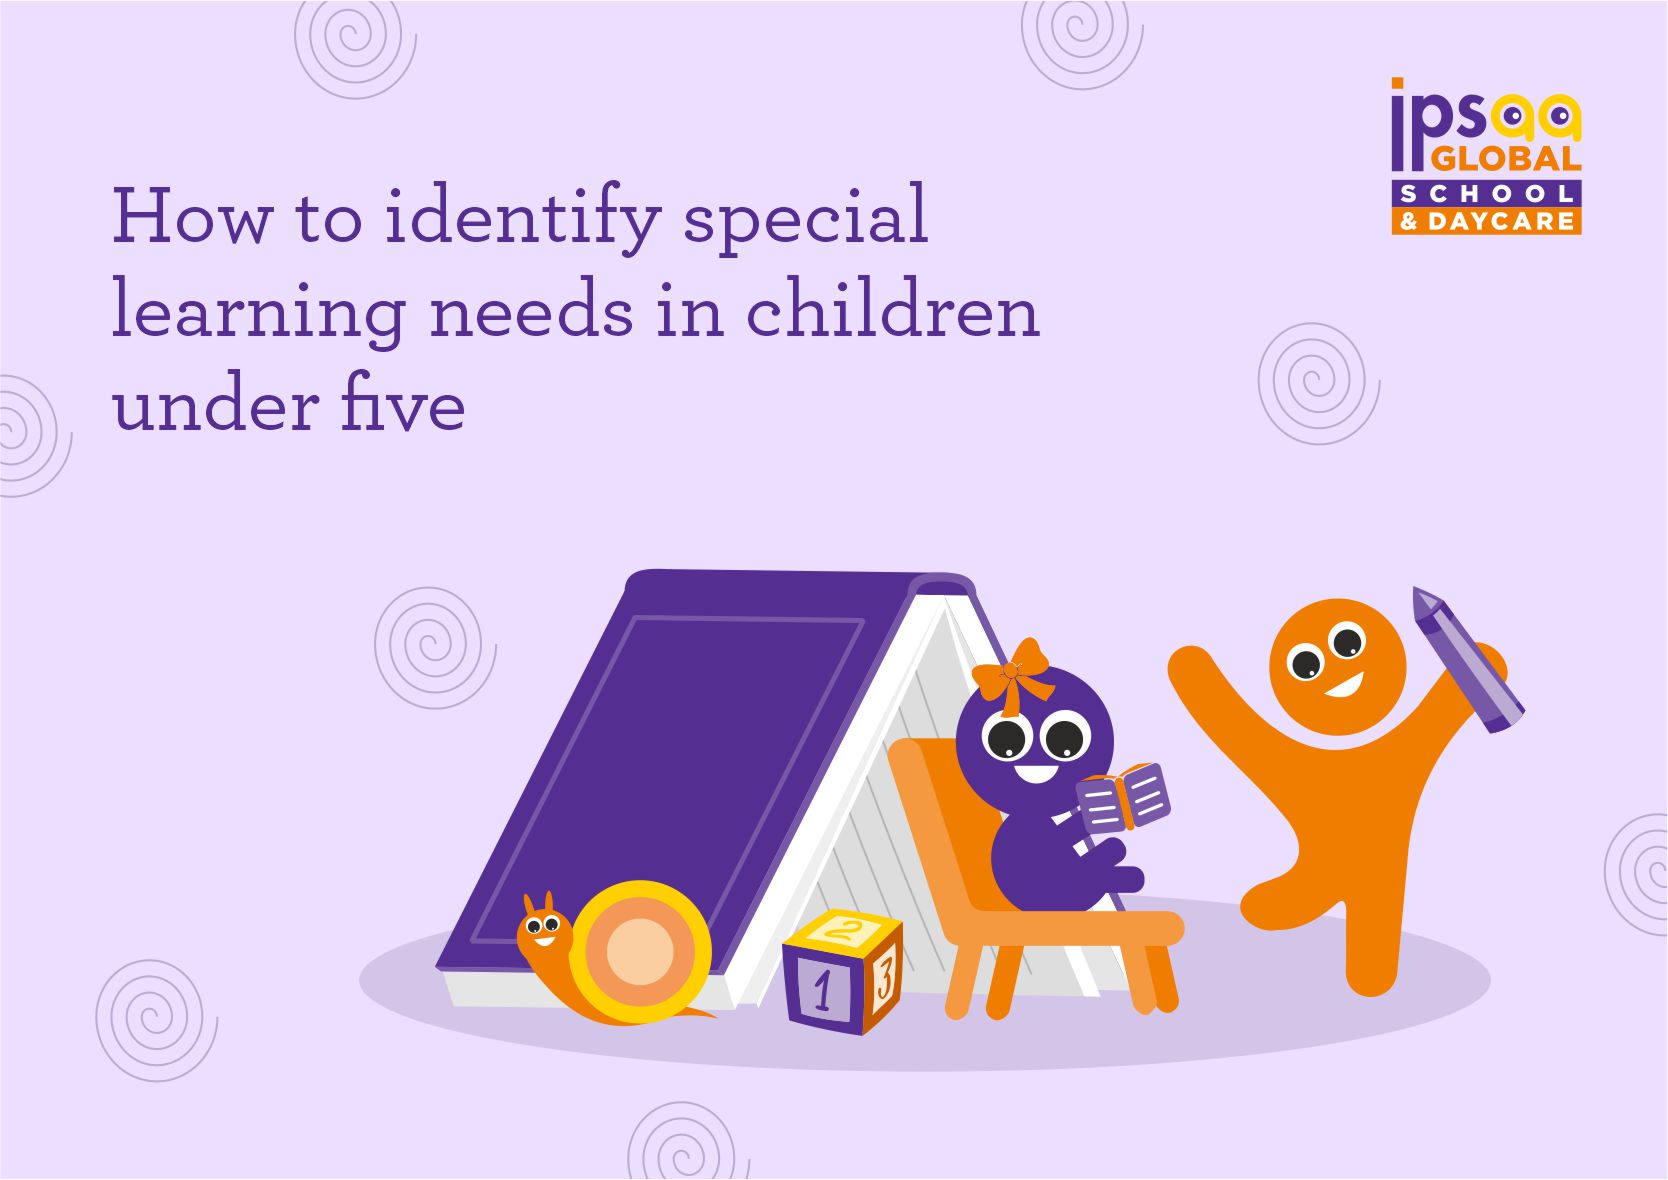 How to identify special learning needs in children under five.